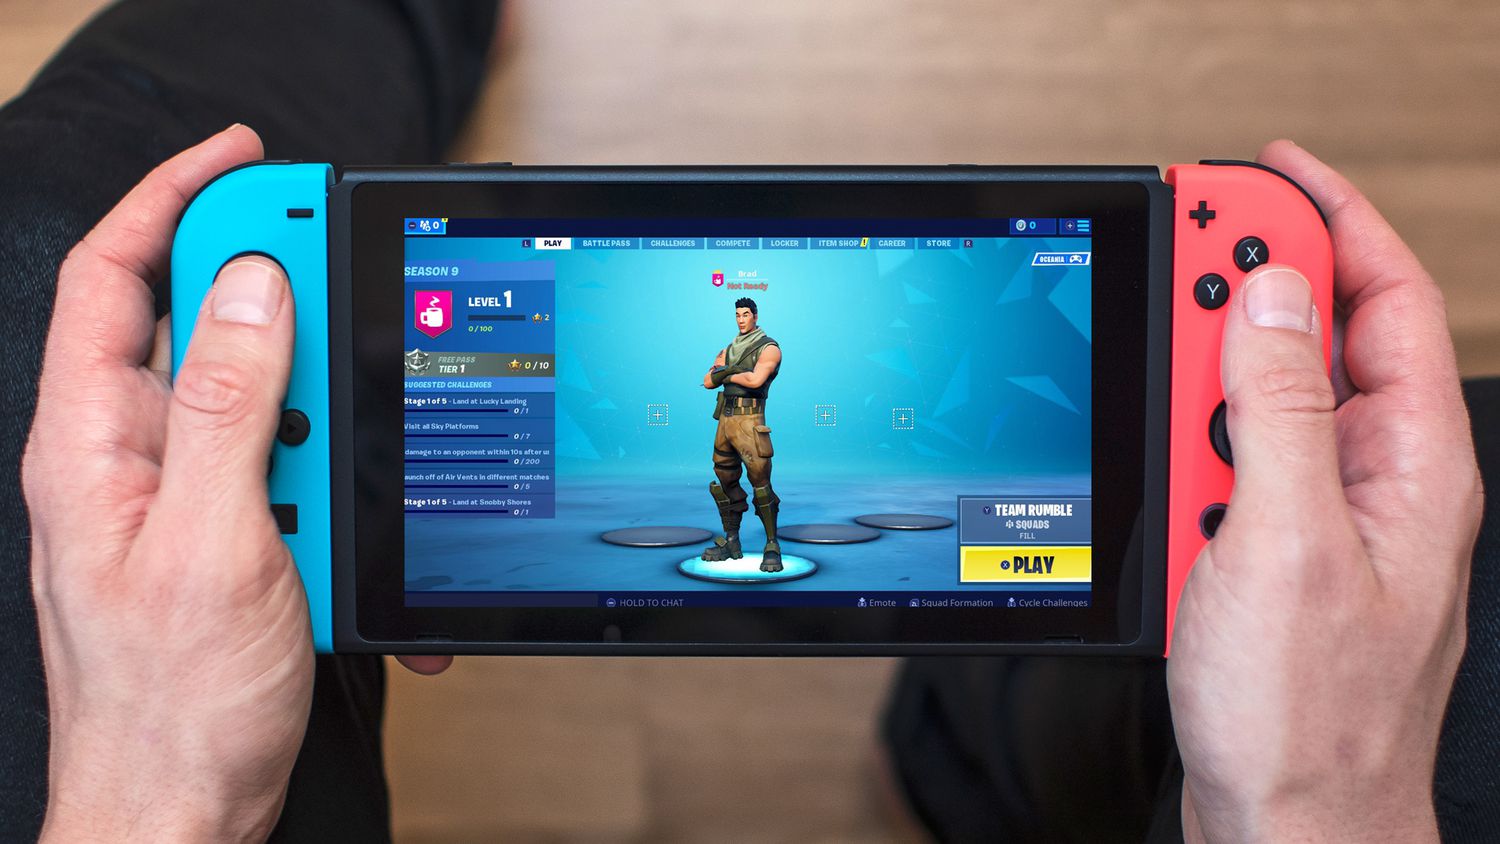 How To Download Fortnite On Nintendo Switch